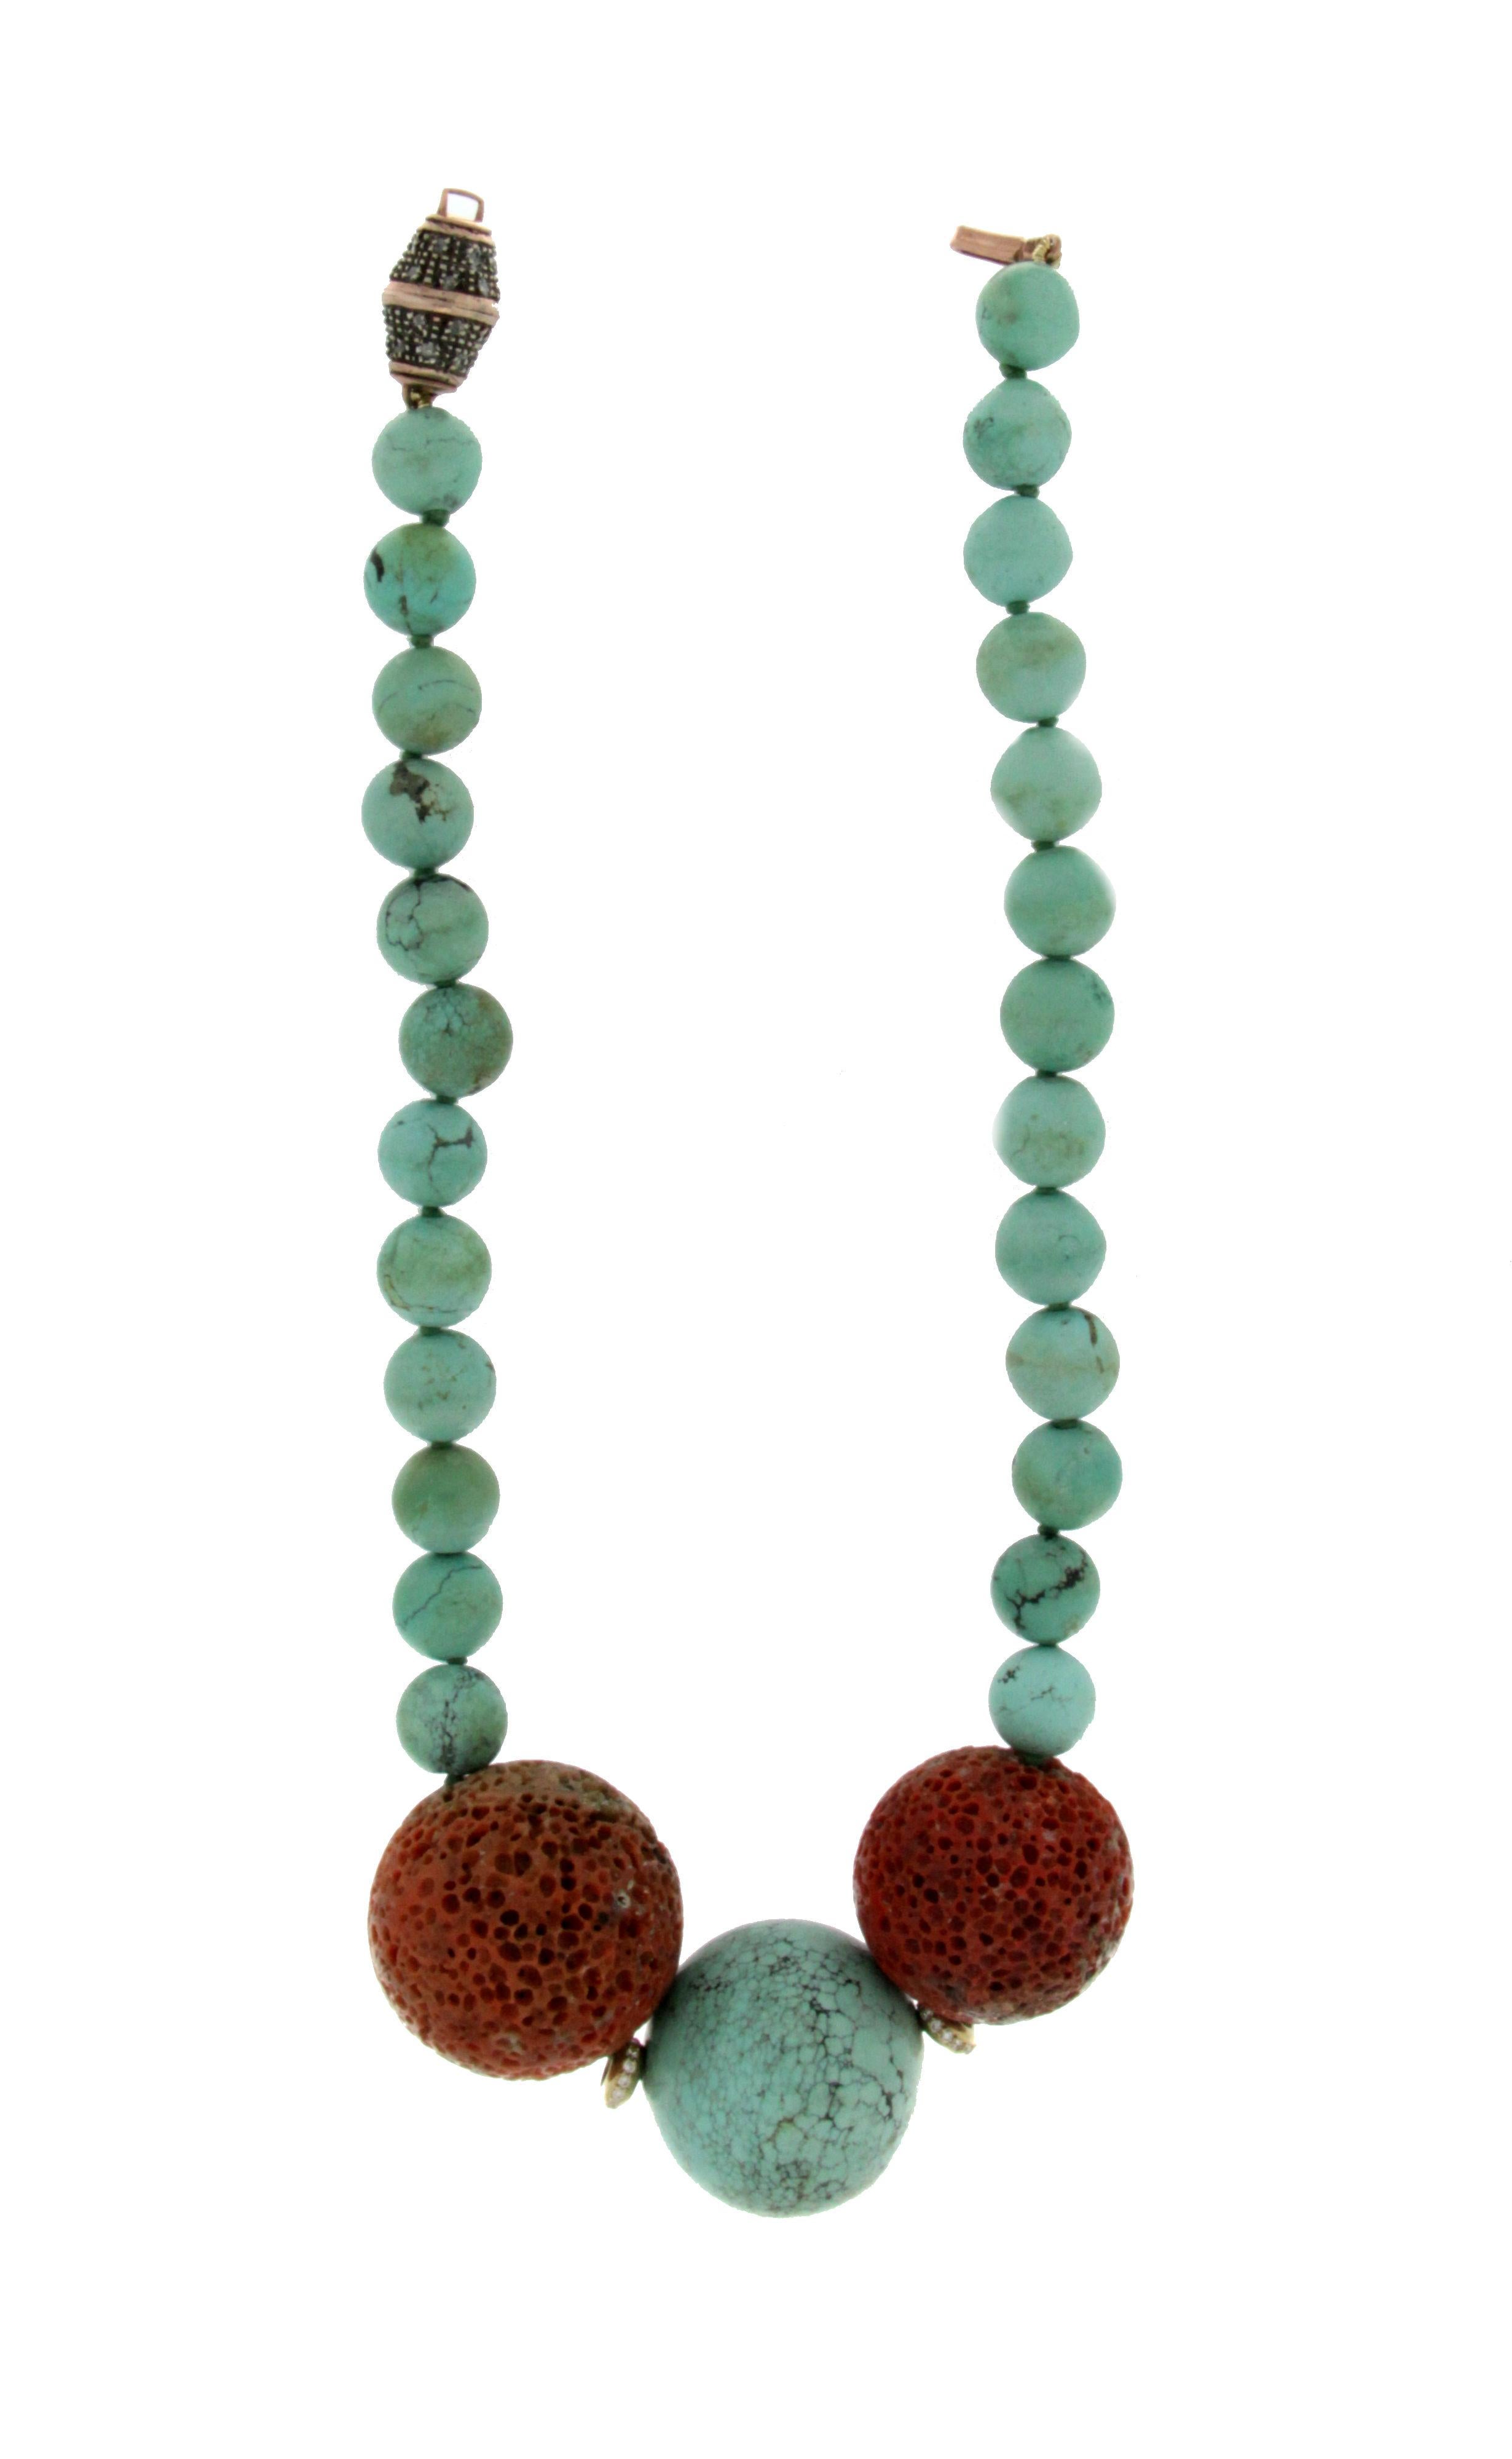 Turquoise 14 karat yellow gold coral diamonds rope necklace
Turquoise small balls size 1.10 cm 
Turquoise big ball size 3 cm

Necklace total weight 114 grams
Diamonds weight 0.15 karat
Turquoise weight 63 grams
Coral weight 44 grams
Necklace length